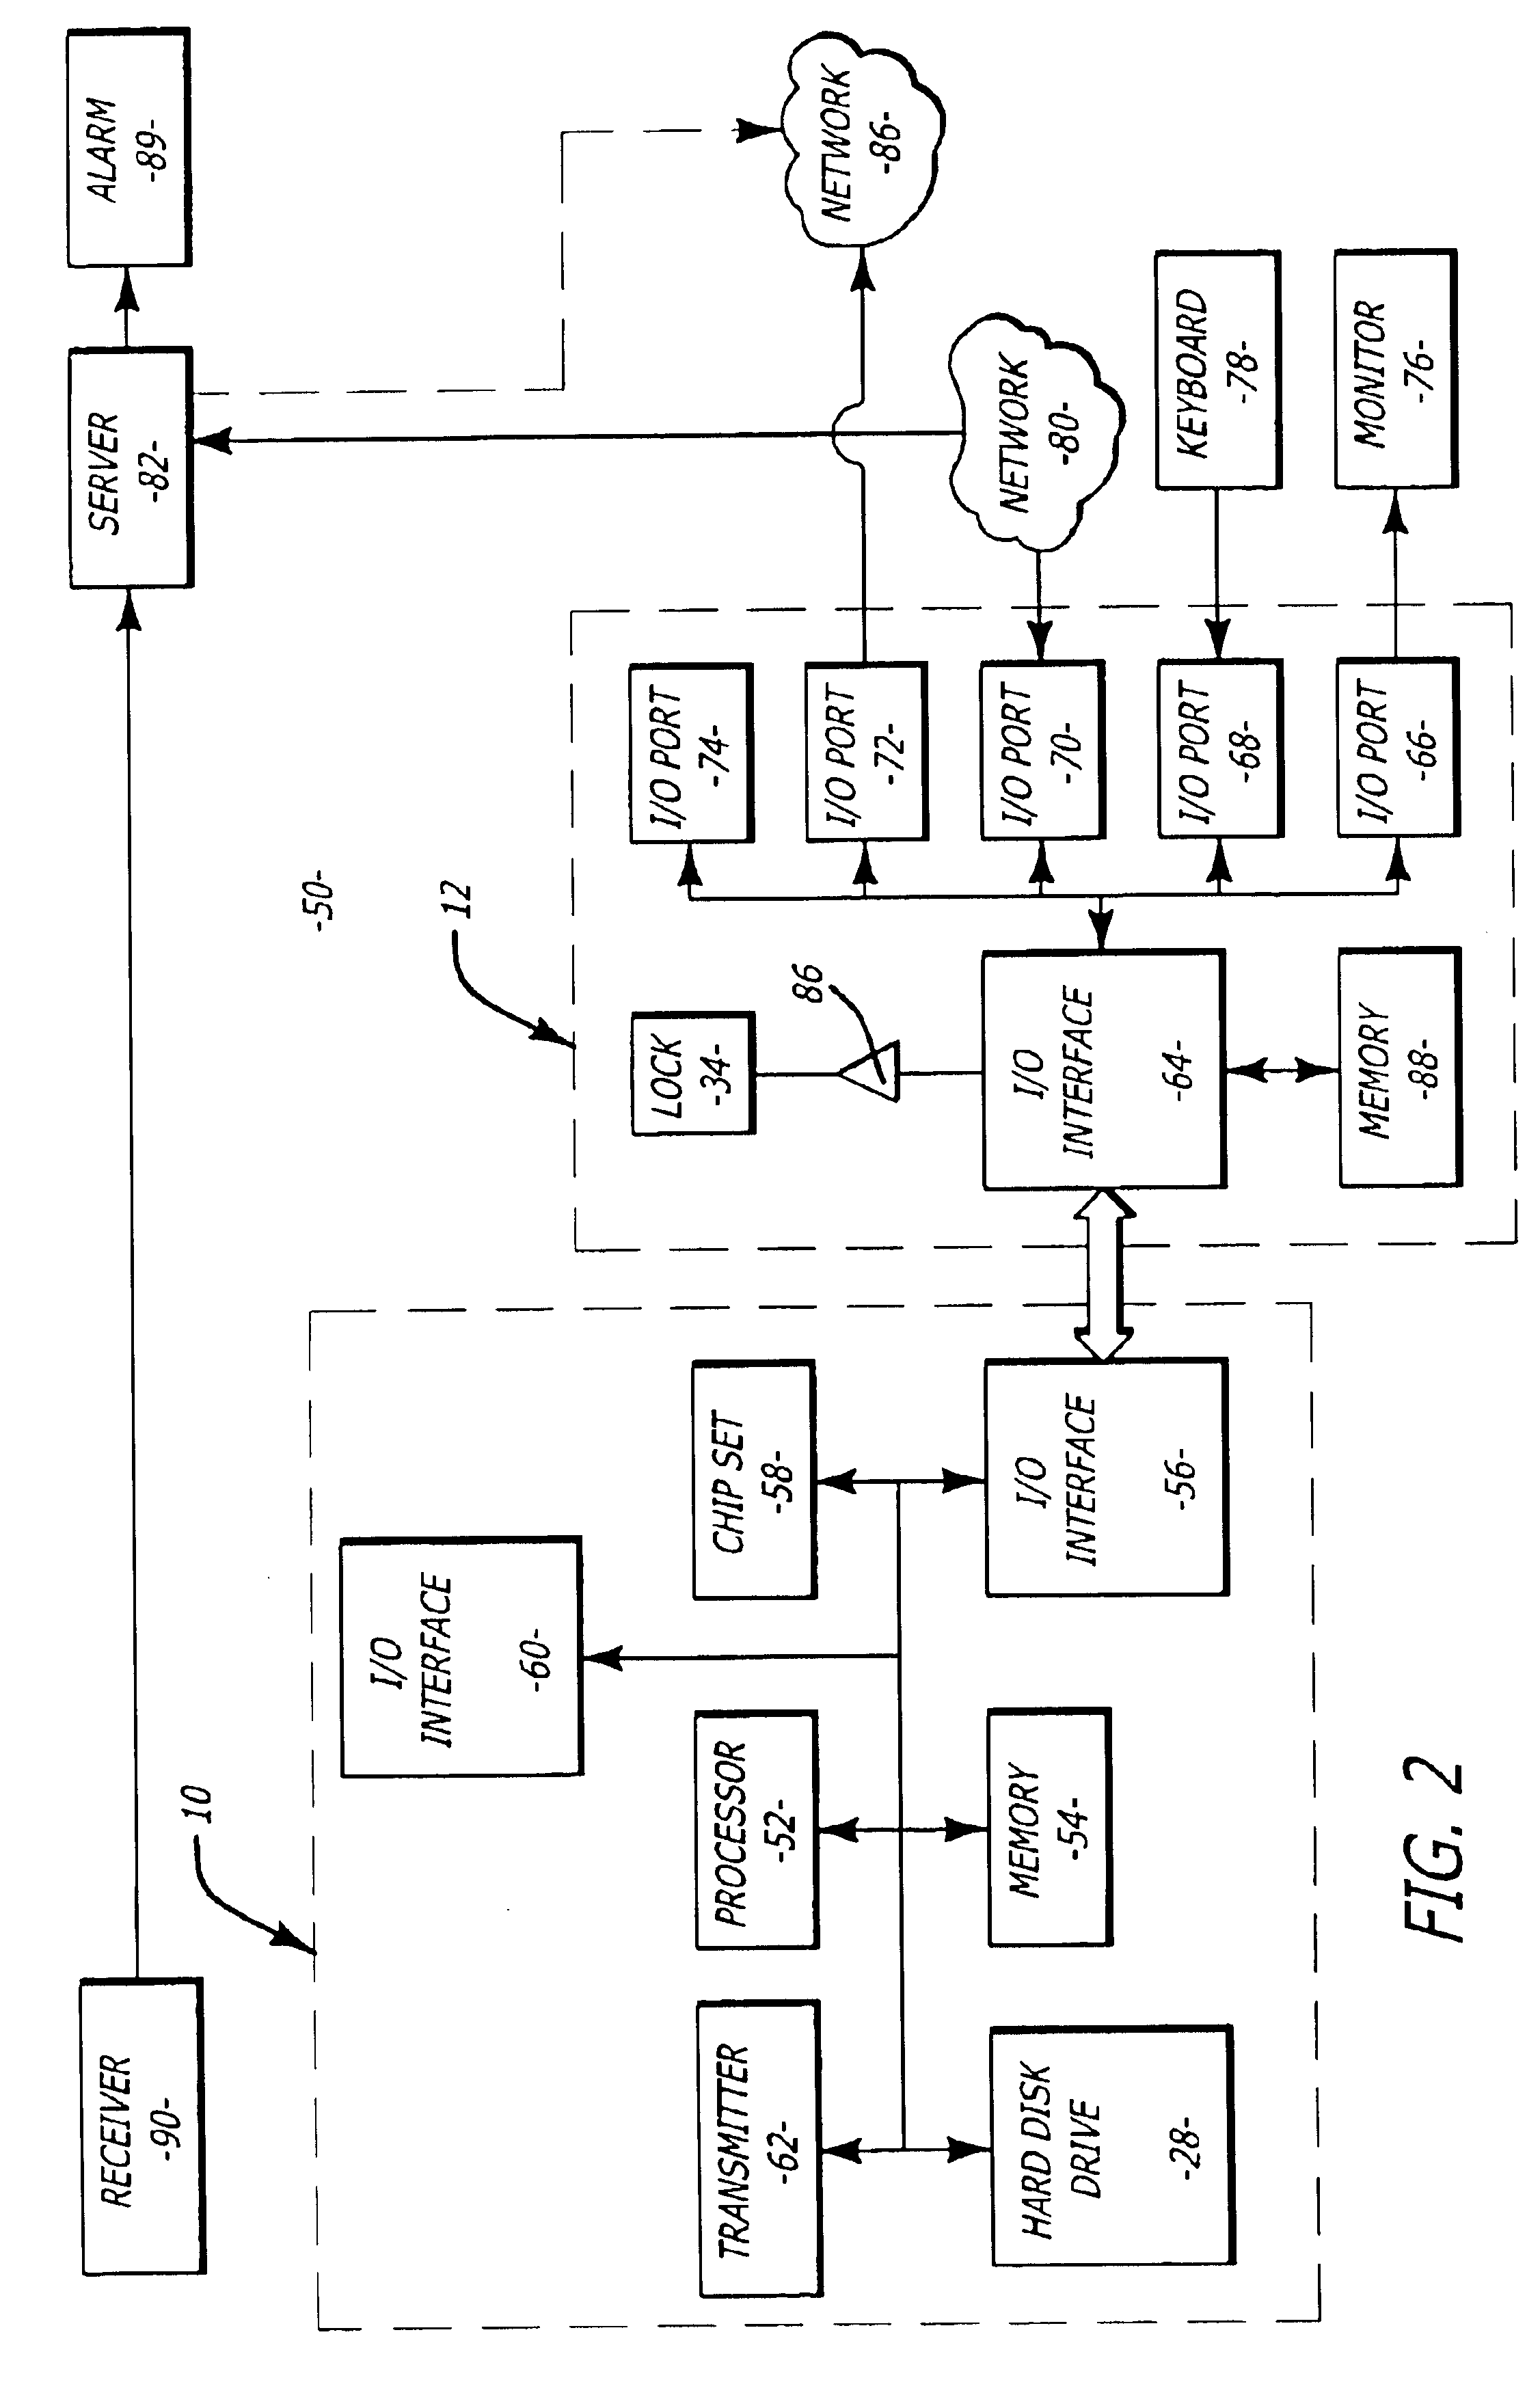 Locator for physically locating an electronic device in a communication network